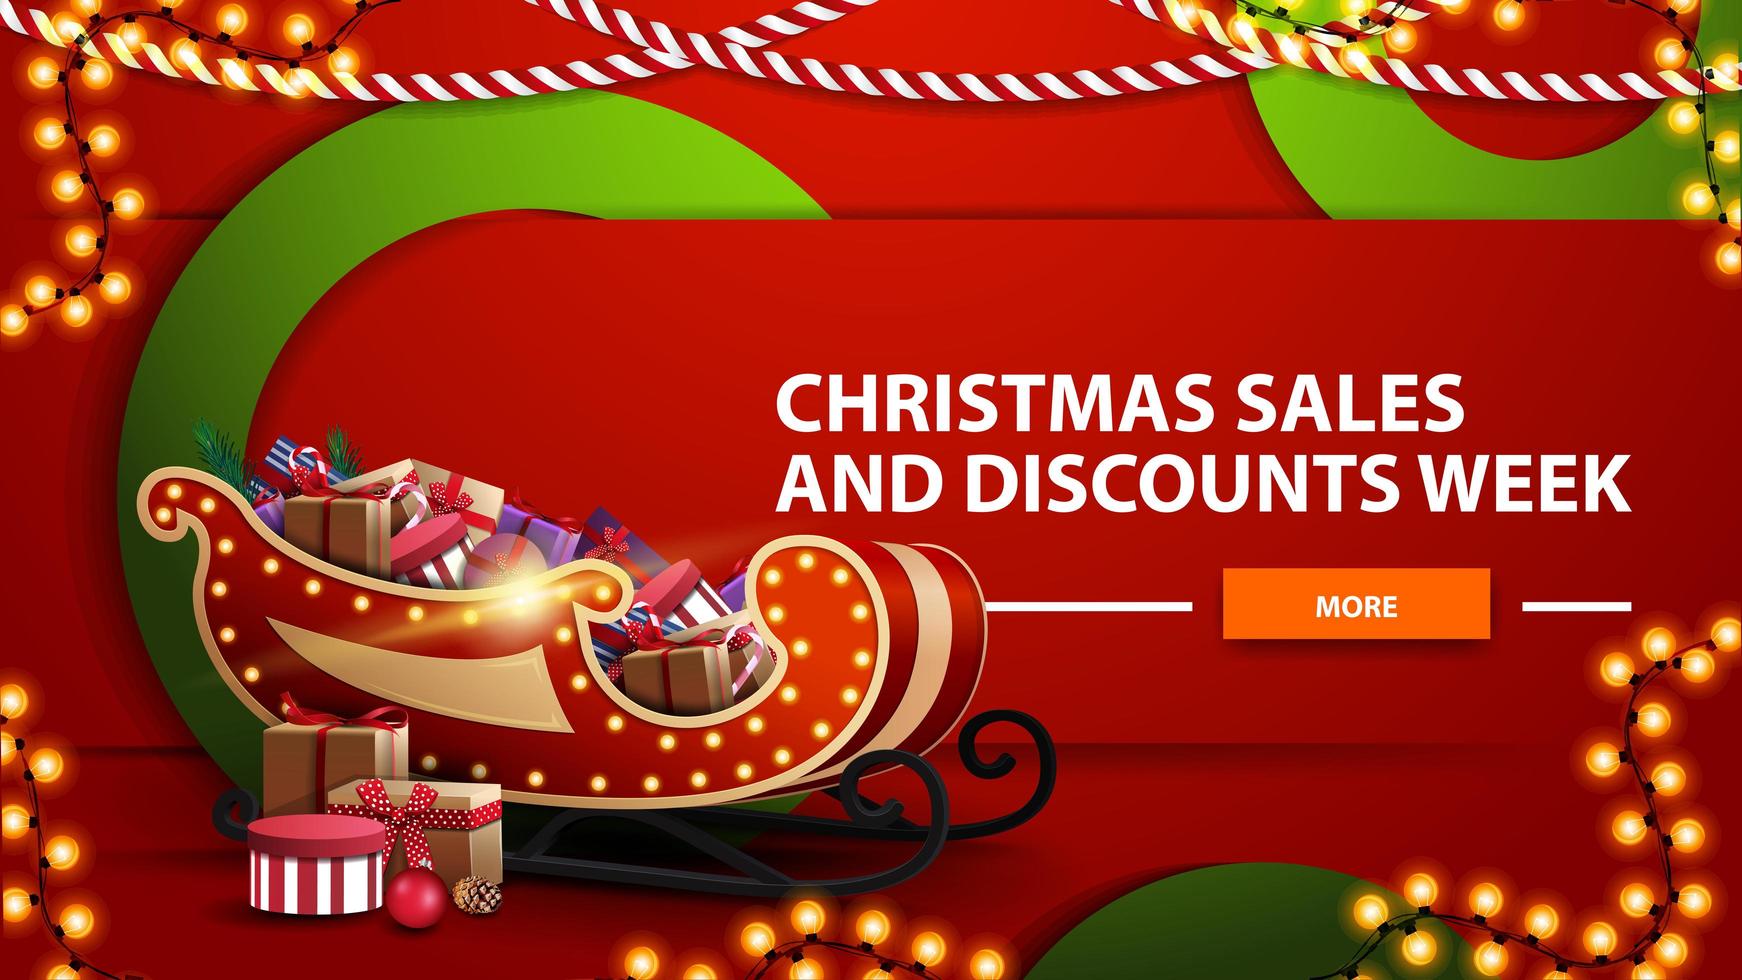 Christmas sales and discount week, red bright horizontal modern web banner with button, large green circles and Santa Sleigh with presents vector